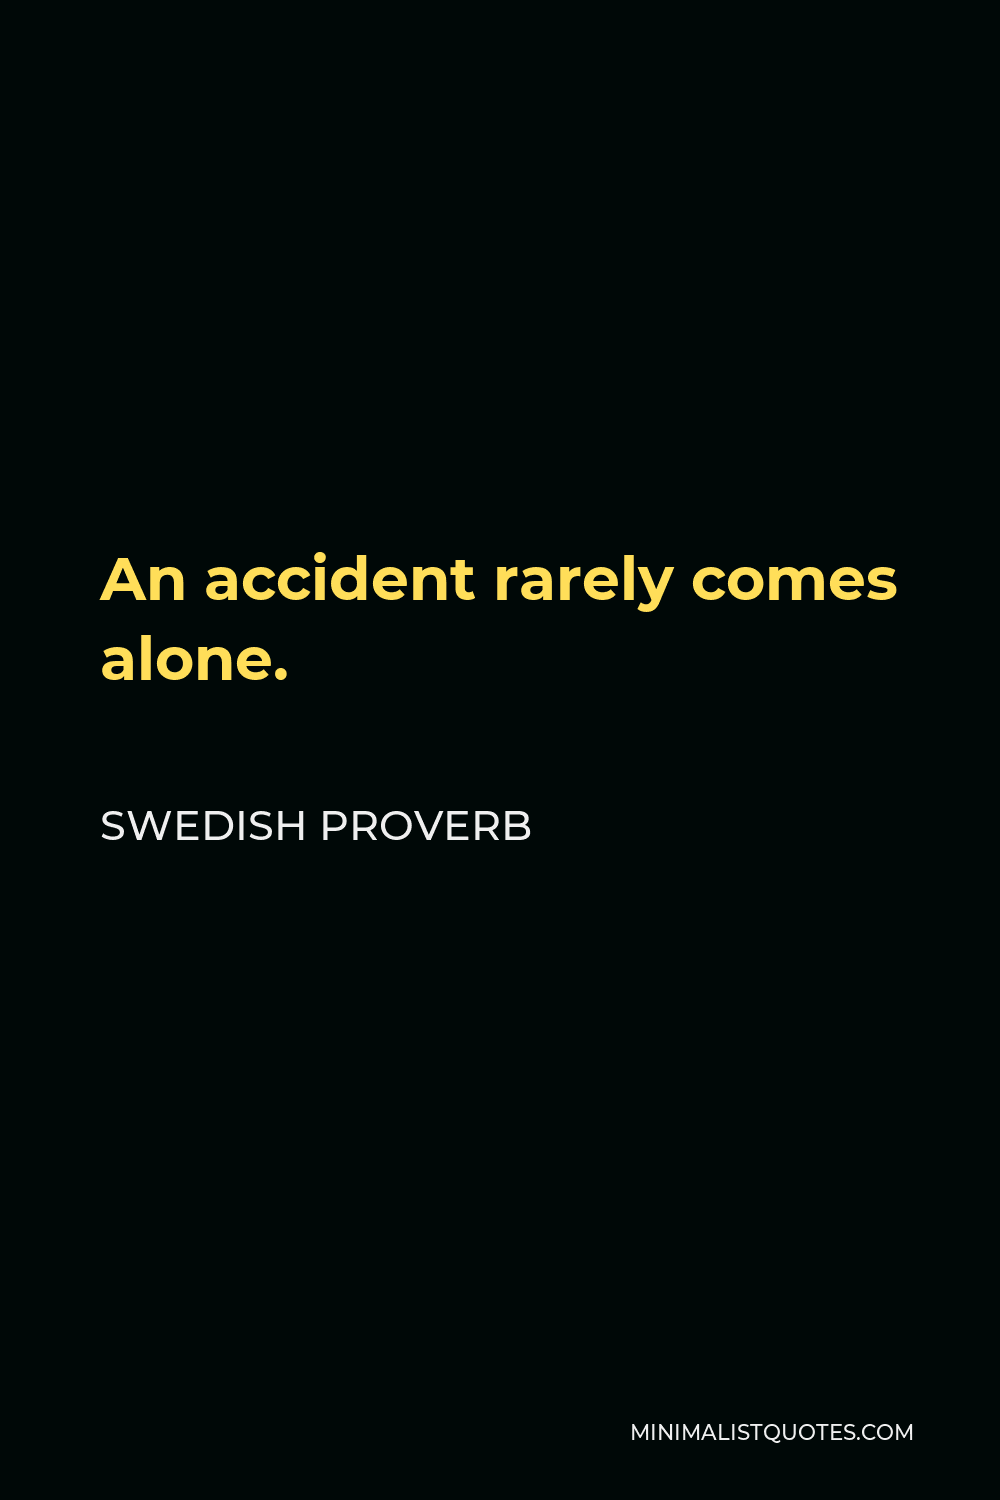 Swedish Proverb Quote - An accident rarely comes alone.